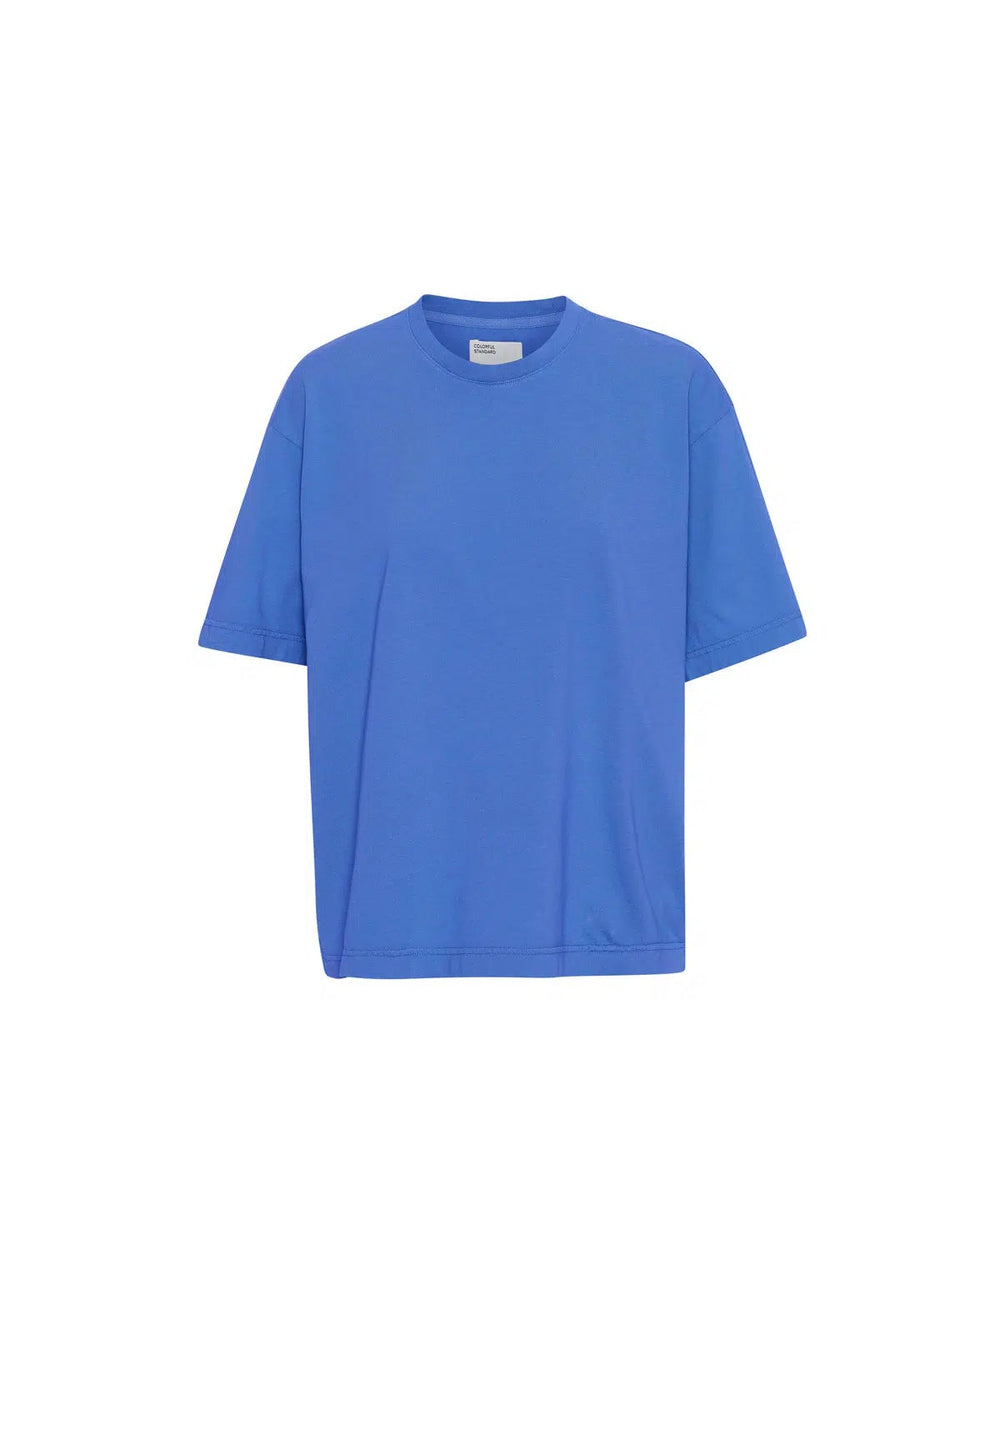 OVERSIZED T-SHIRT PACIFIC BLUE - Moeon